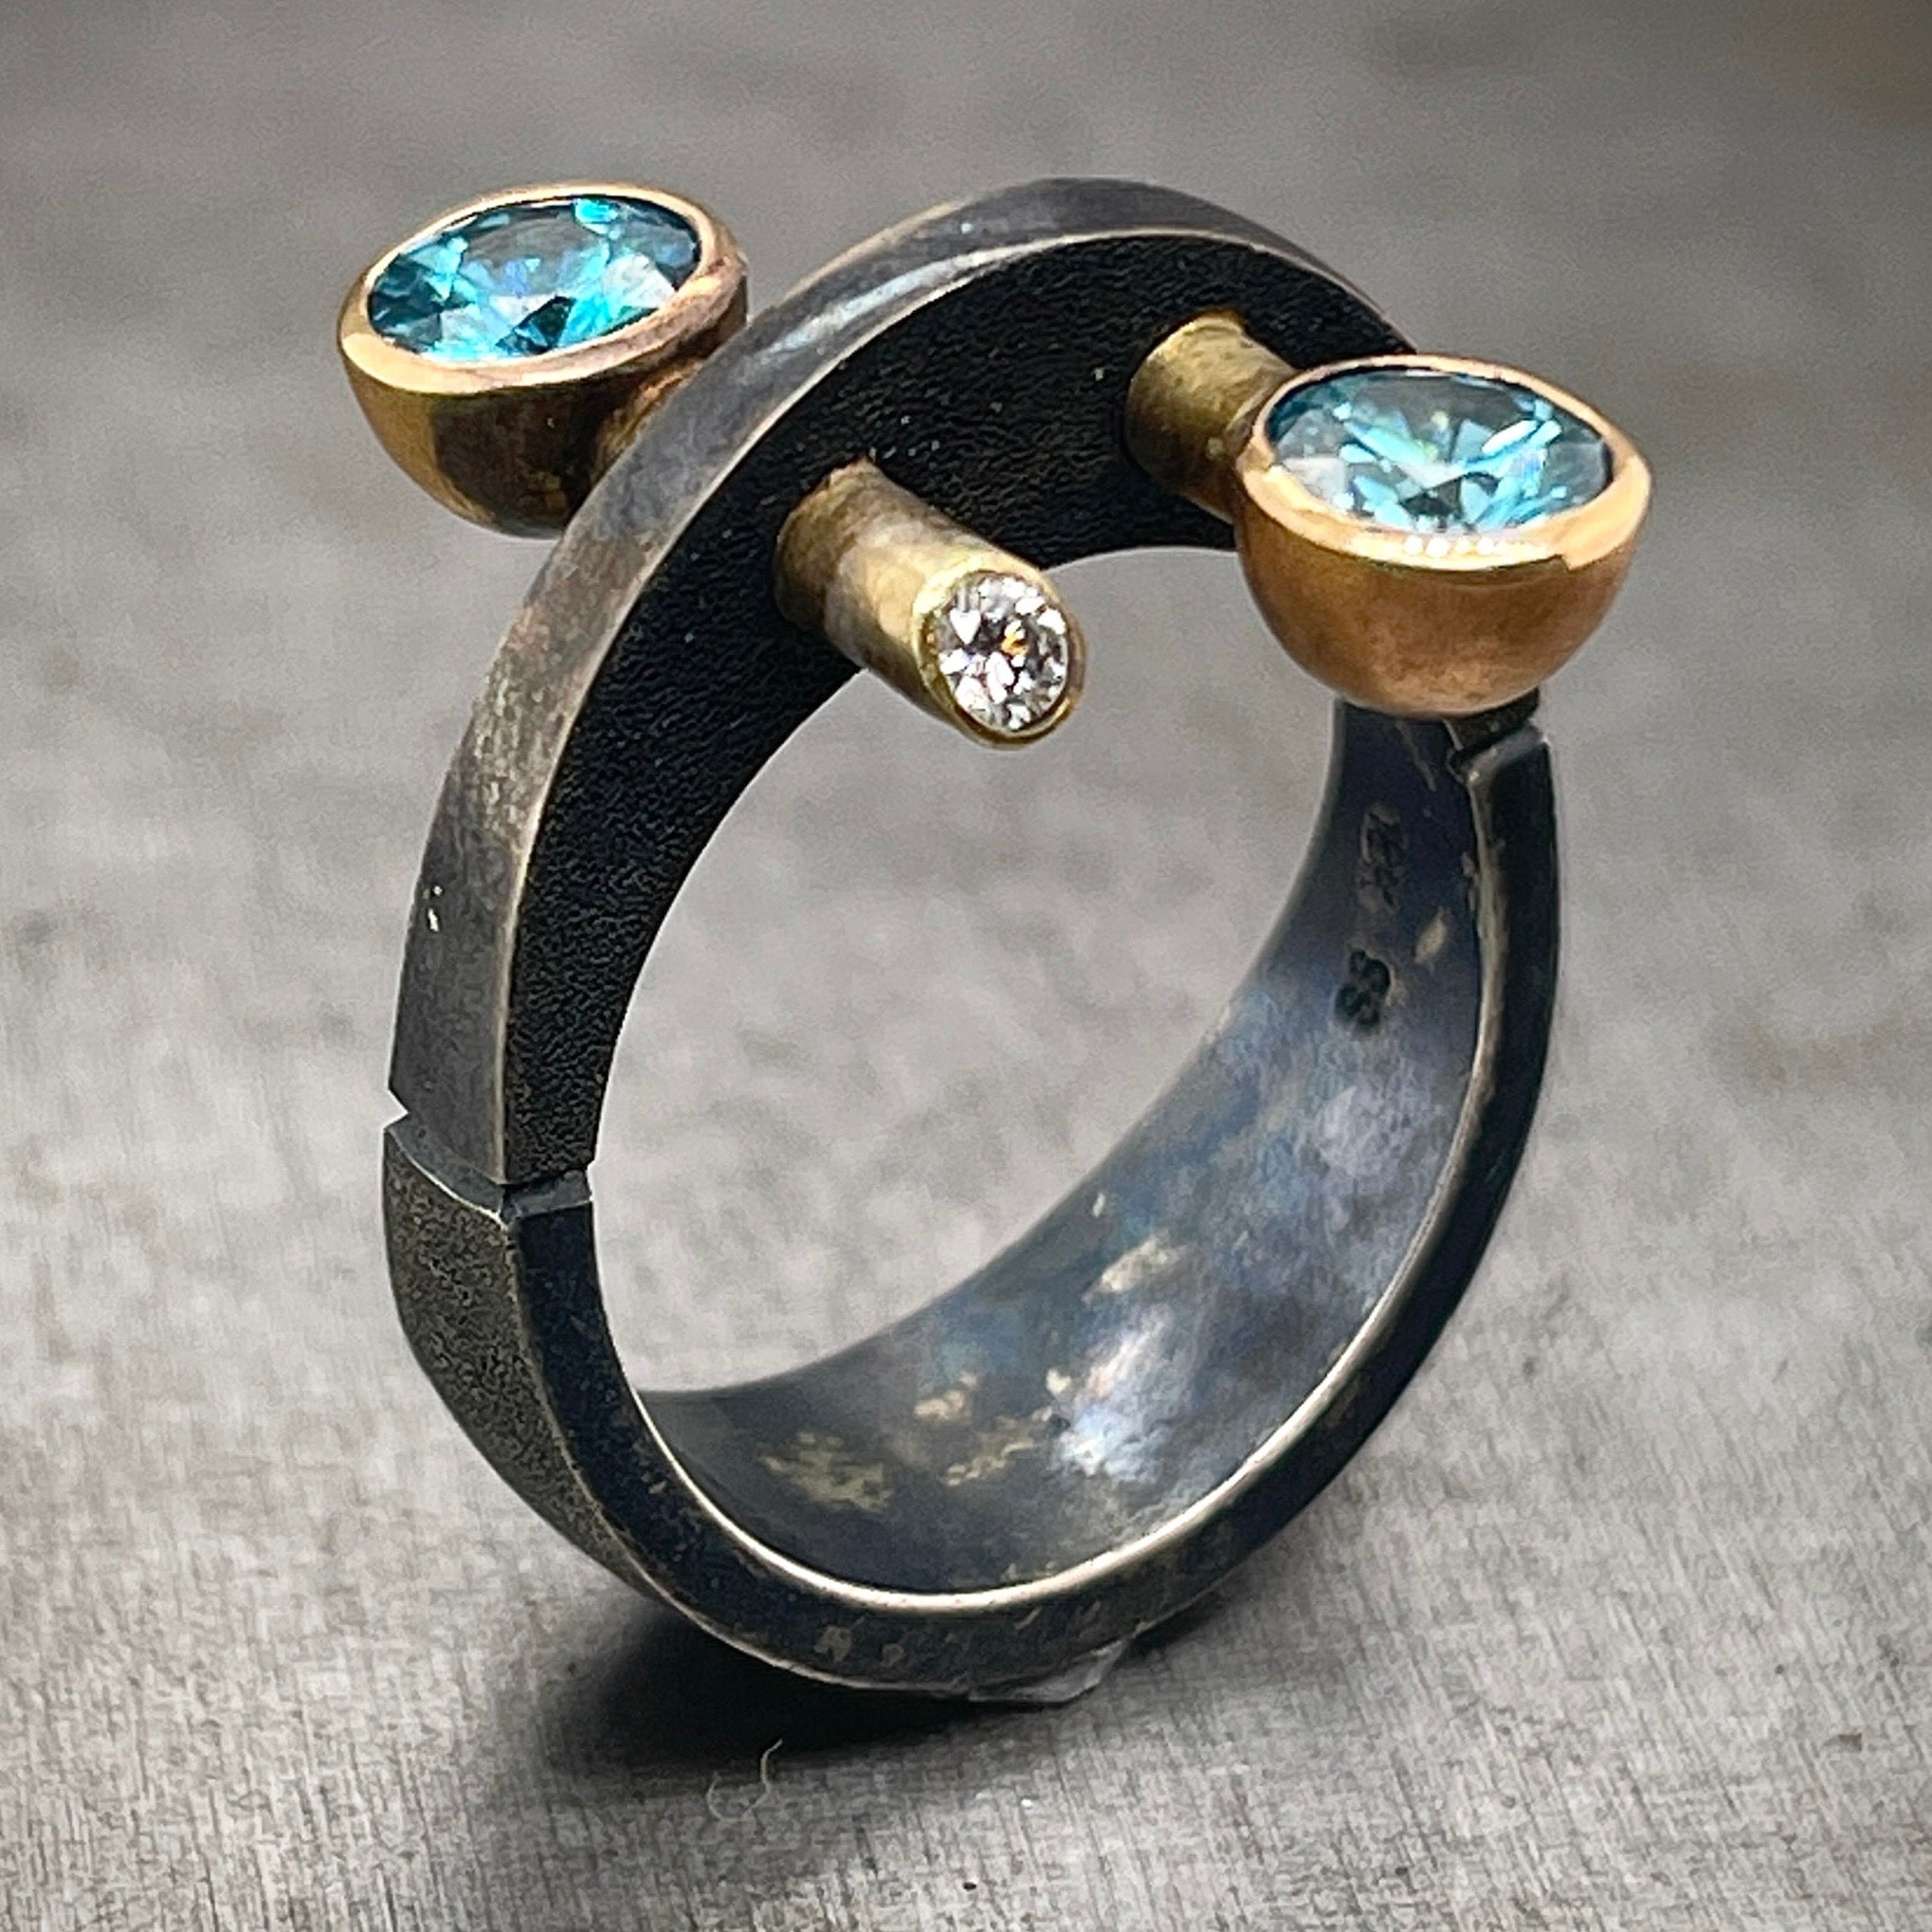 Oxidized Sterling Silver and Gold, Blue Zircon and Diamond Ring. The ring is upright, turned to display a 3/4 view. 